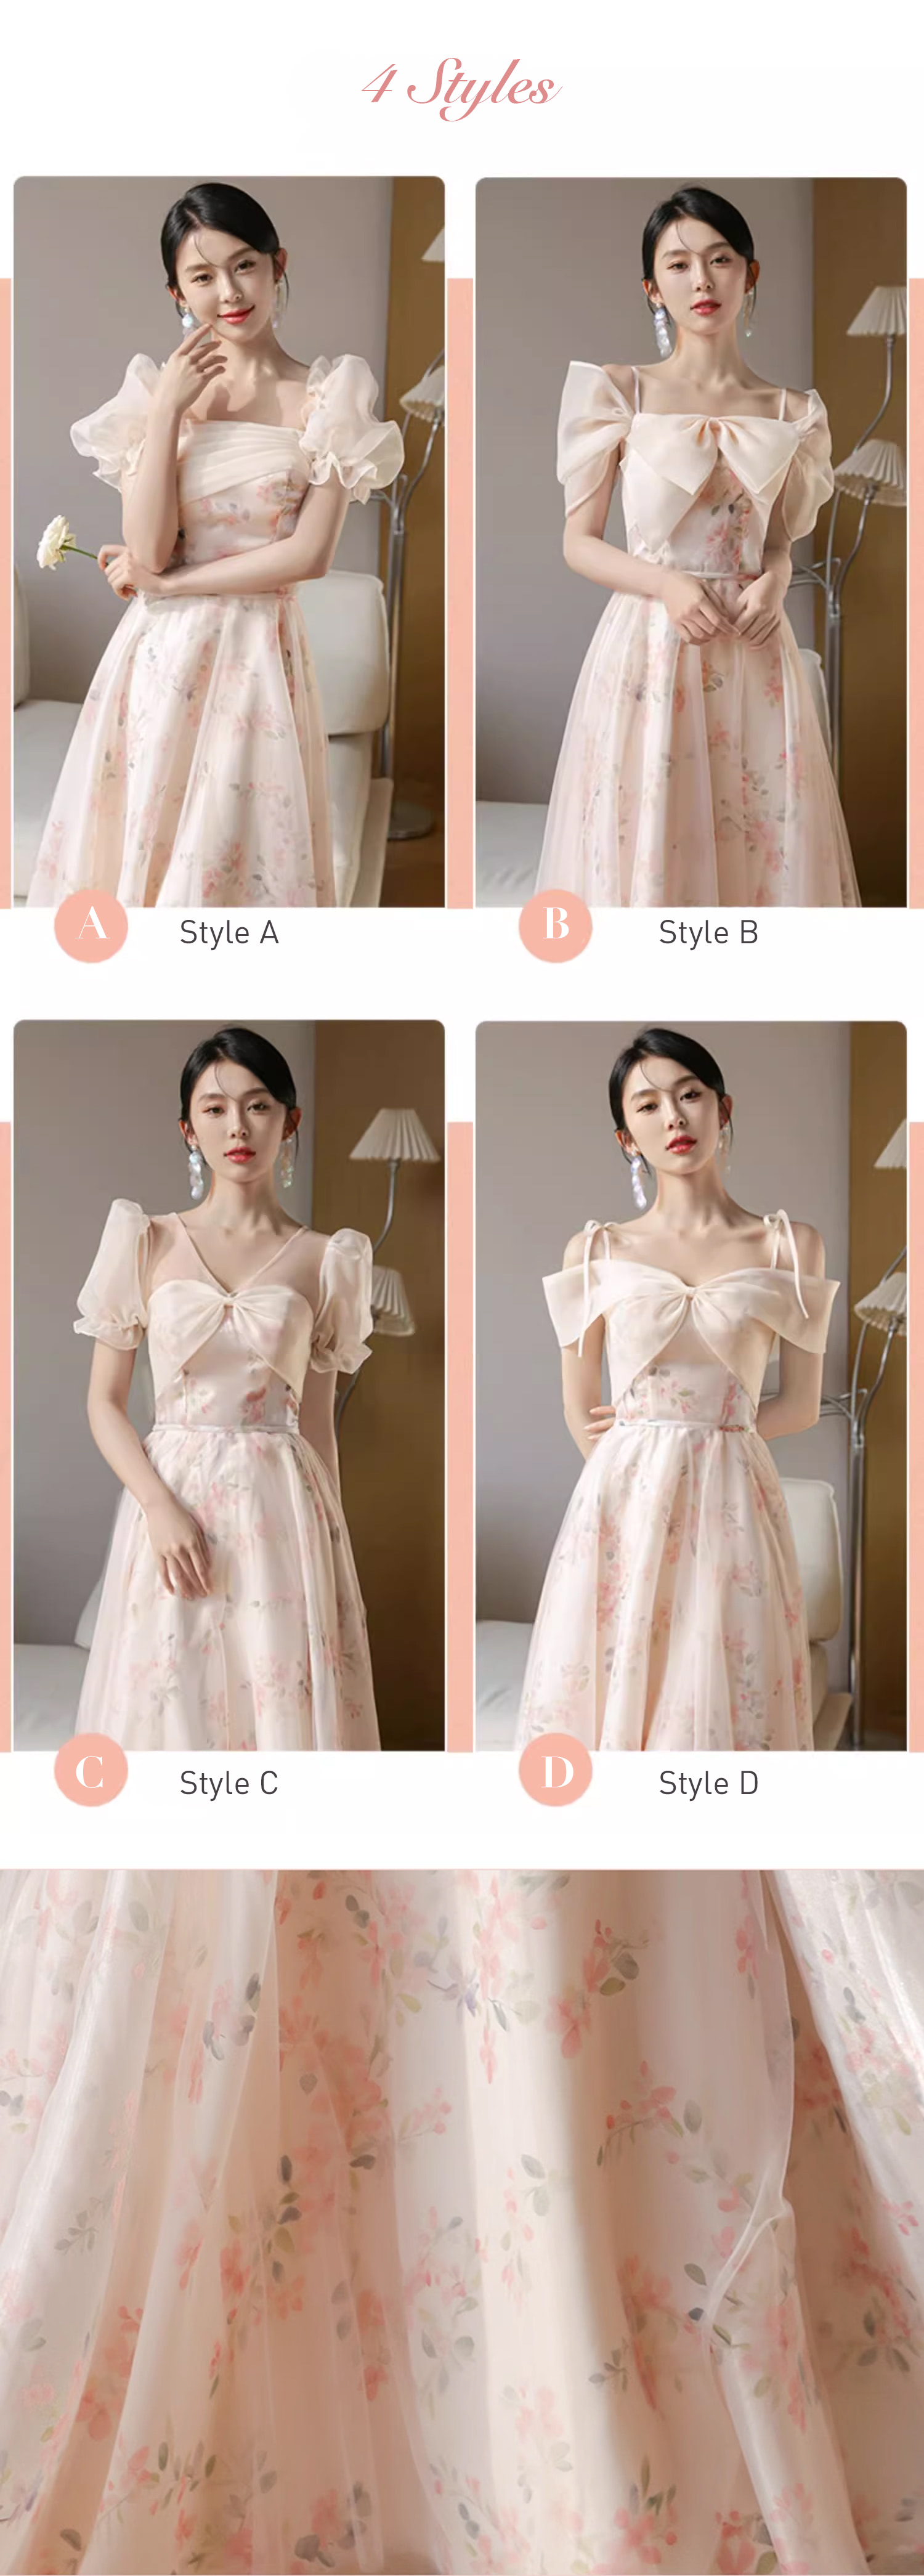 Sweet-A-line-Chiffon-Pink-Floral-Tulle-Maxi-Cocktail-Bridesmaid-Dress12